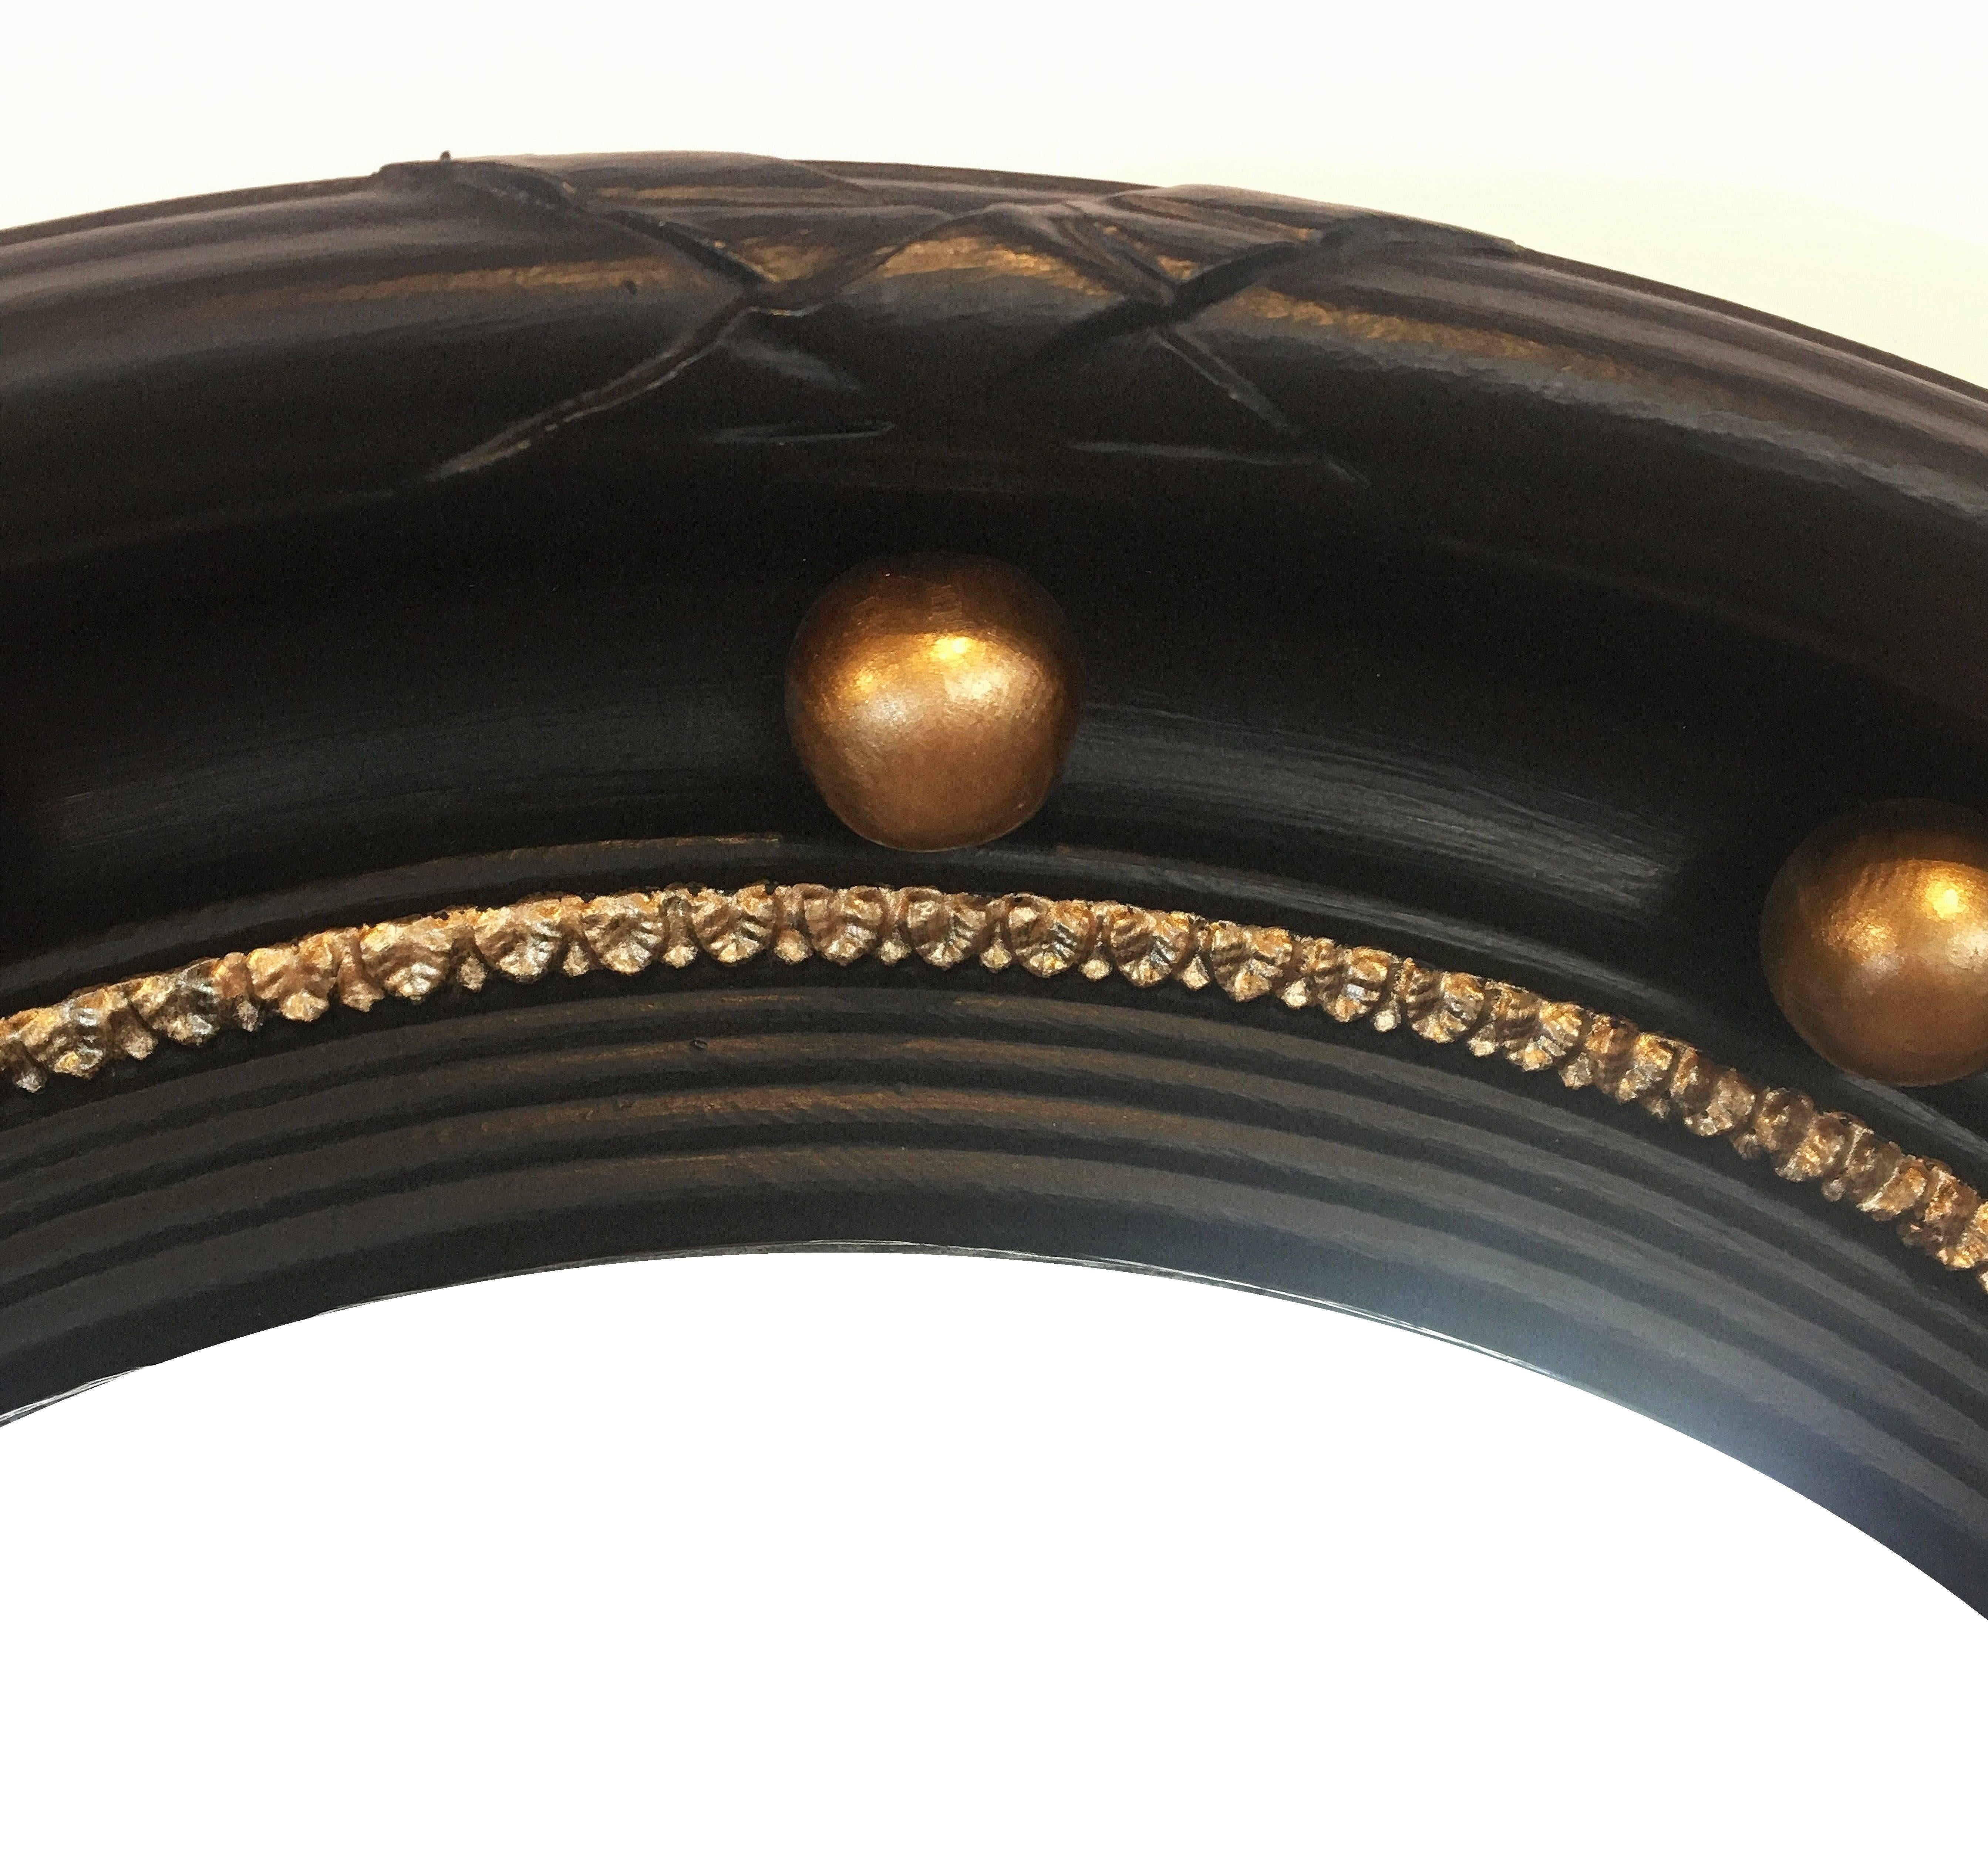 A fine English round convex mirror featuring a Regency design of a moulded, ebonised frame with gilt balls around the circumference.

Diameter is 17 1/4 inches